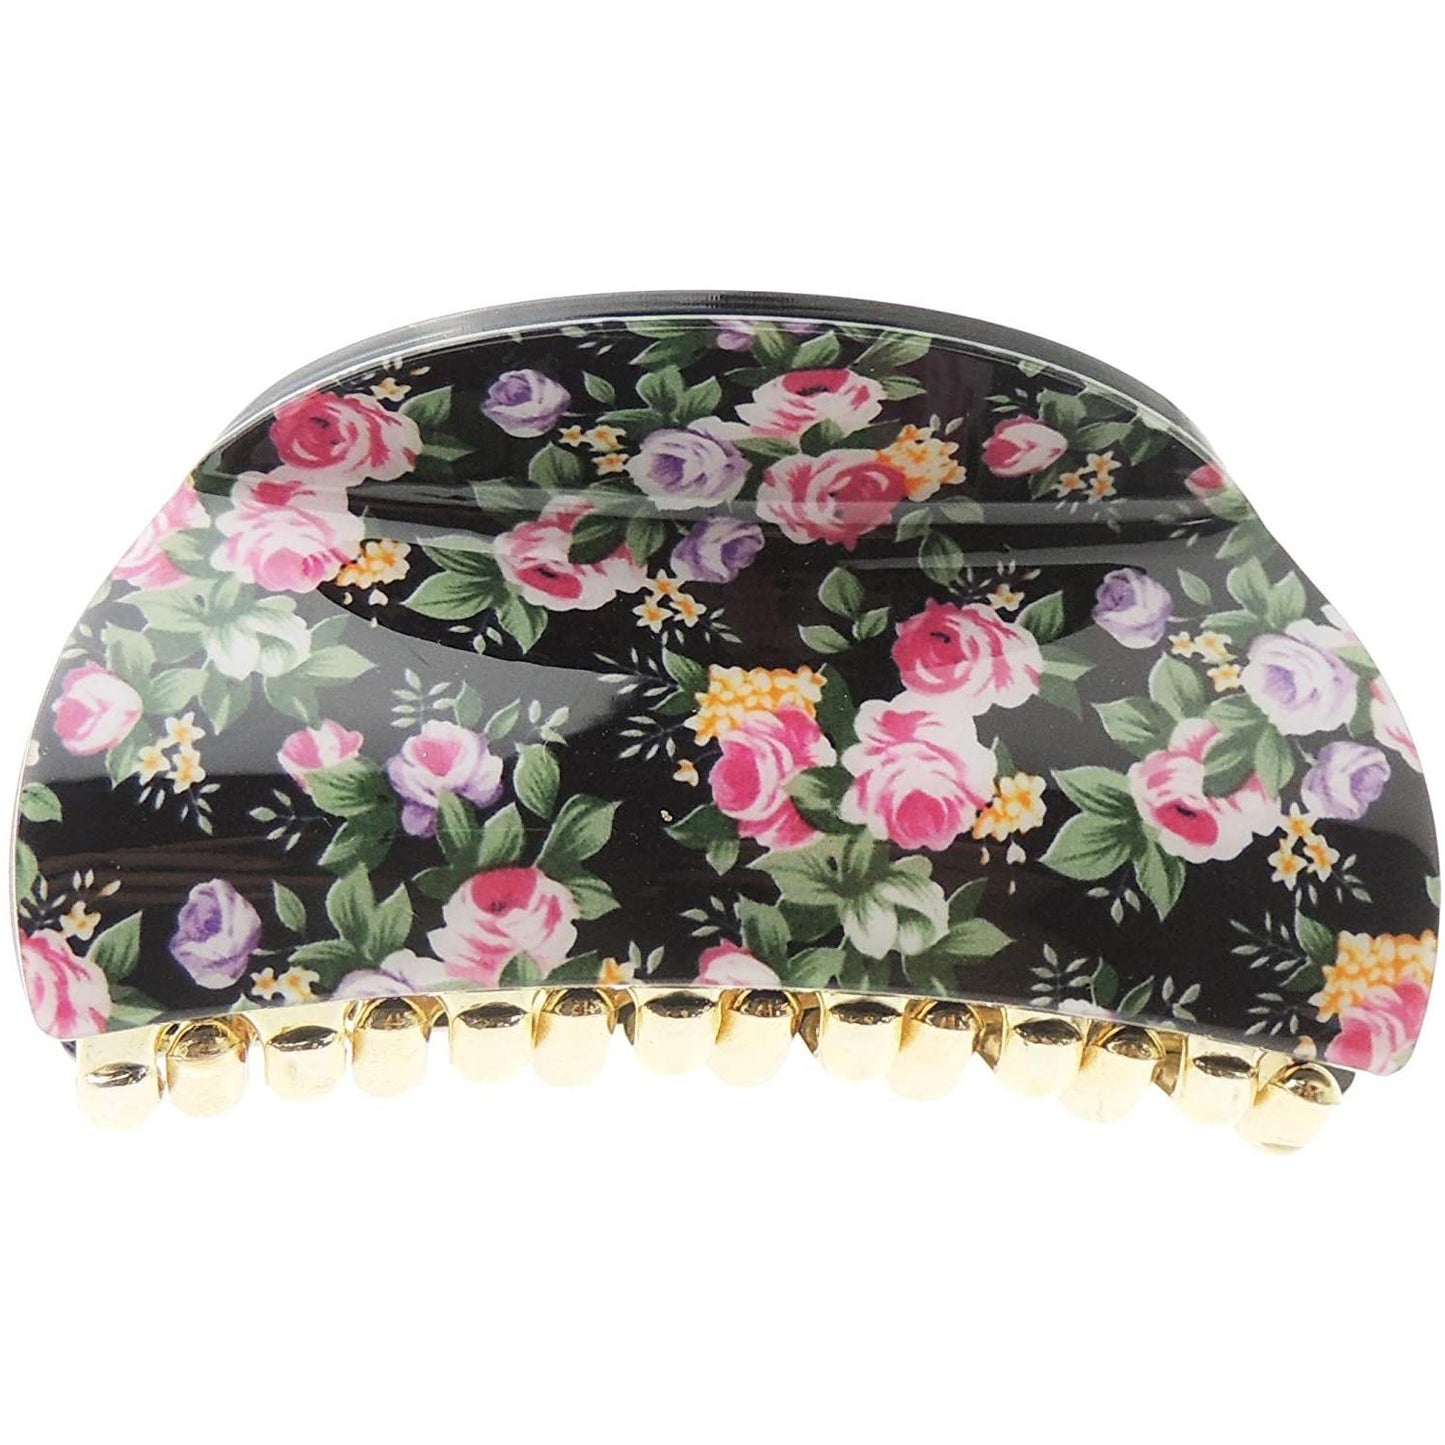 Ladies Floral English Garden Print Covered Oval Rounded Hair Claw Clamp Clip